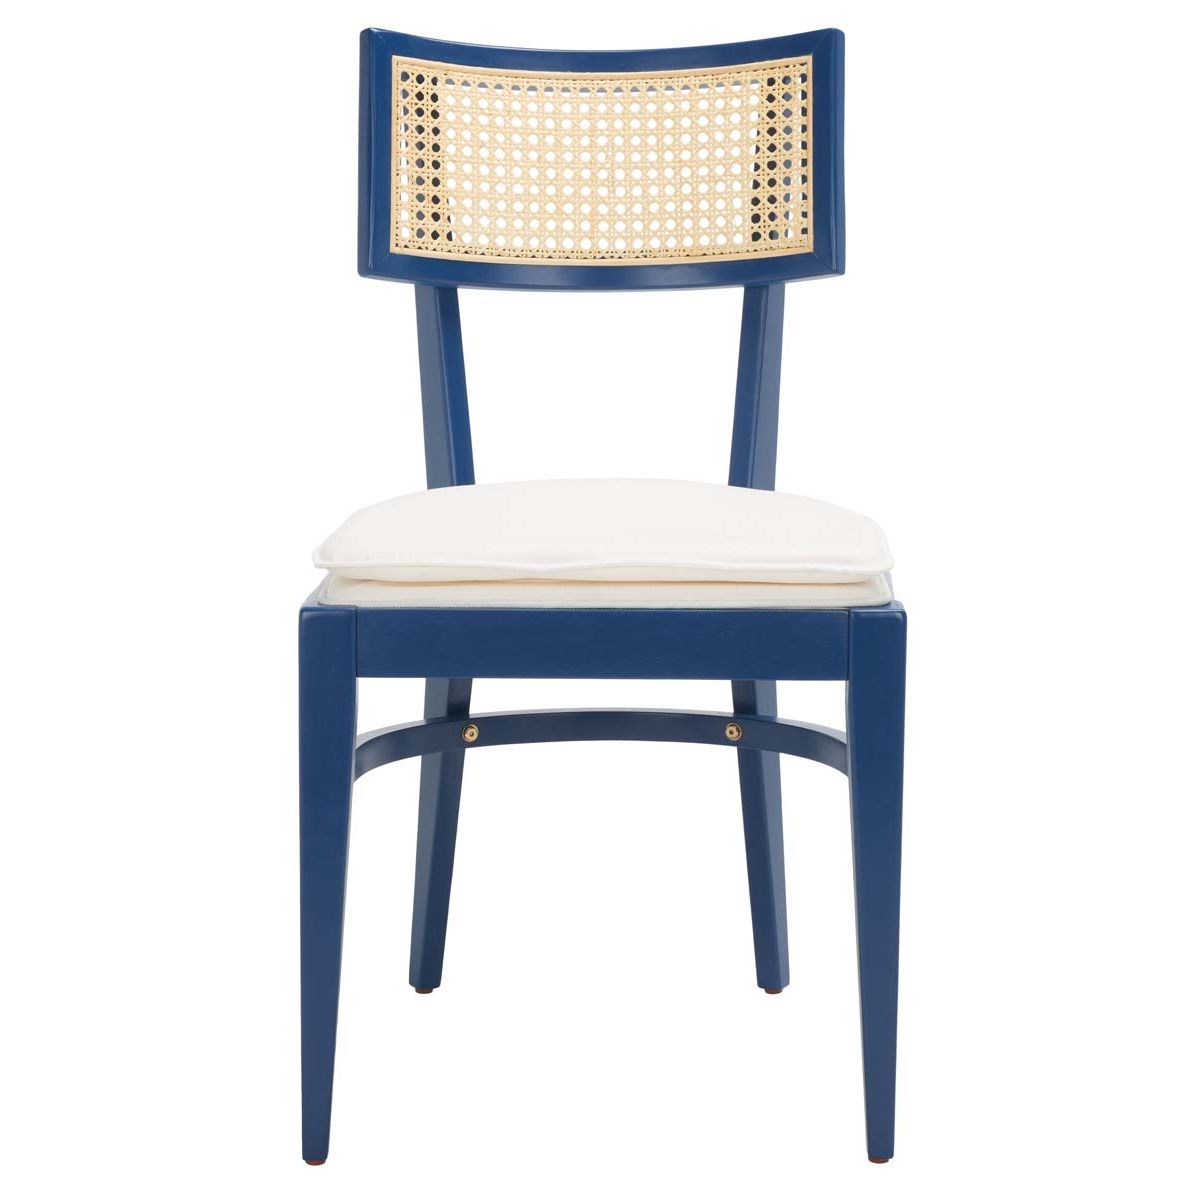 Safavieh Galway Cane Dining Chair , DCH1007 - Navy